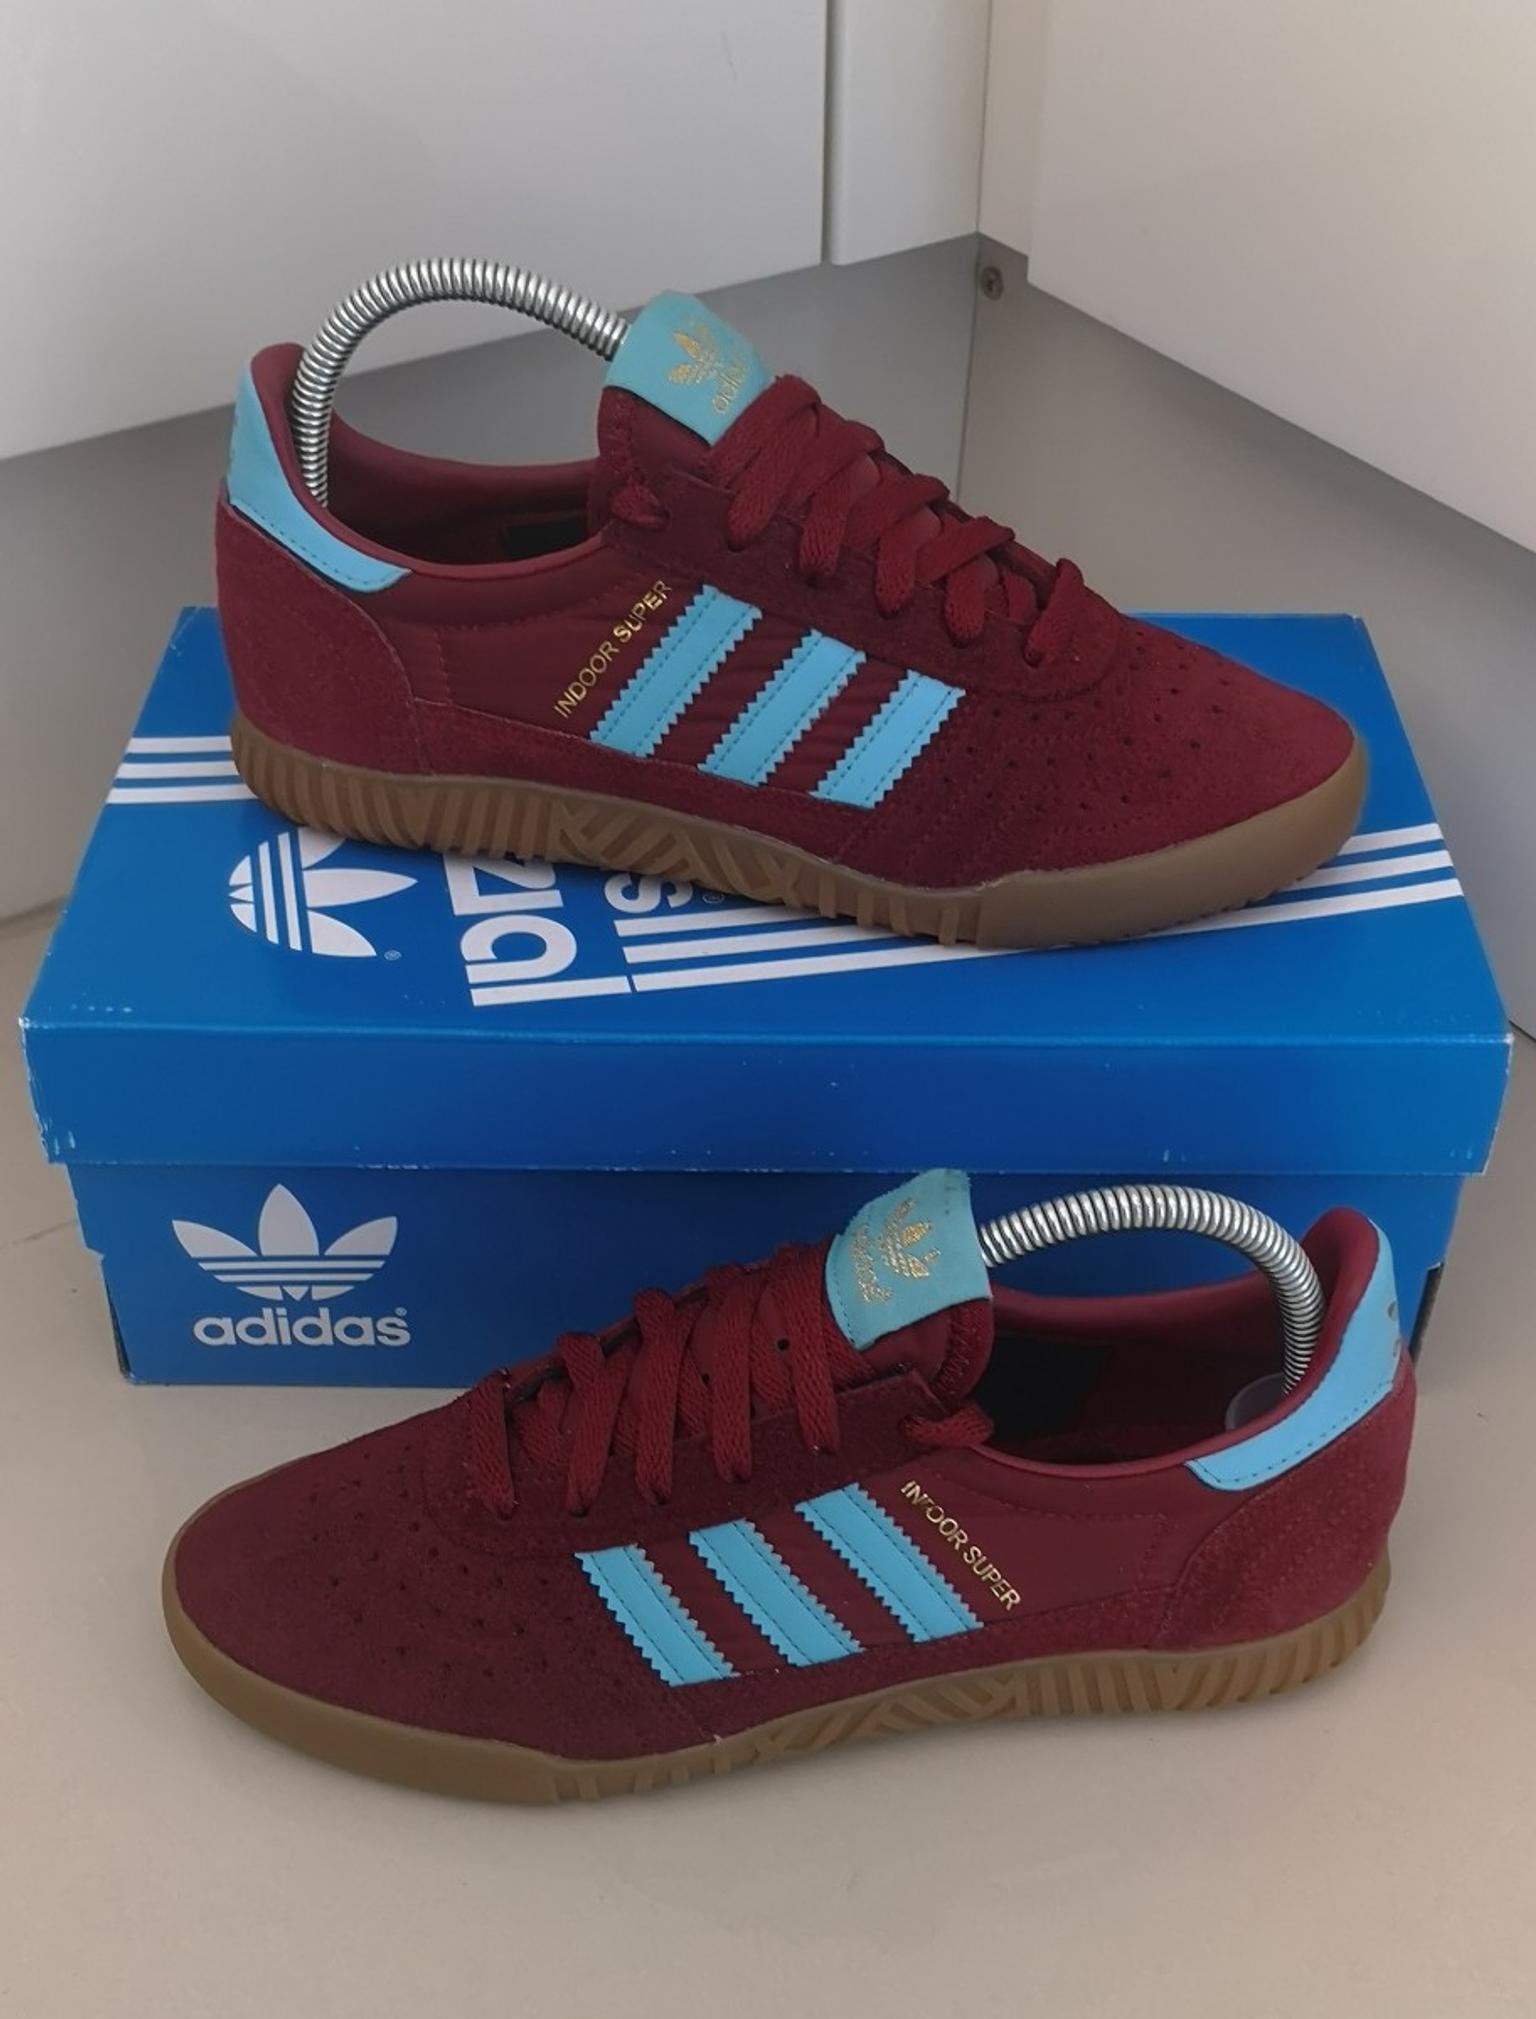 claret and sky blue trainers